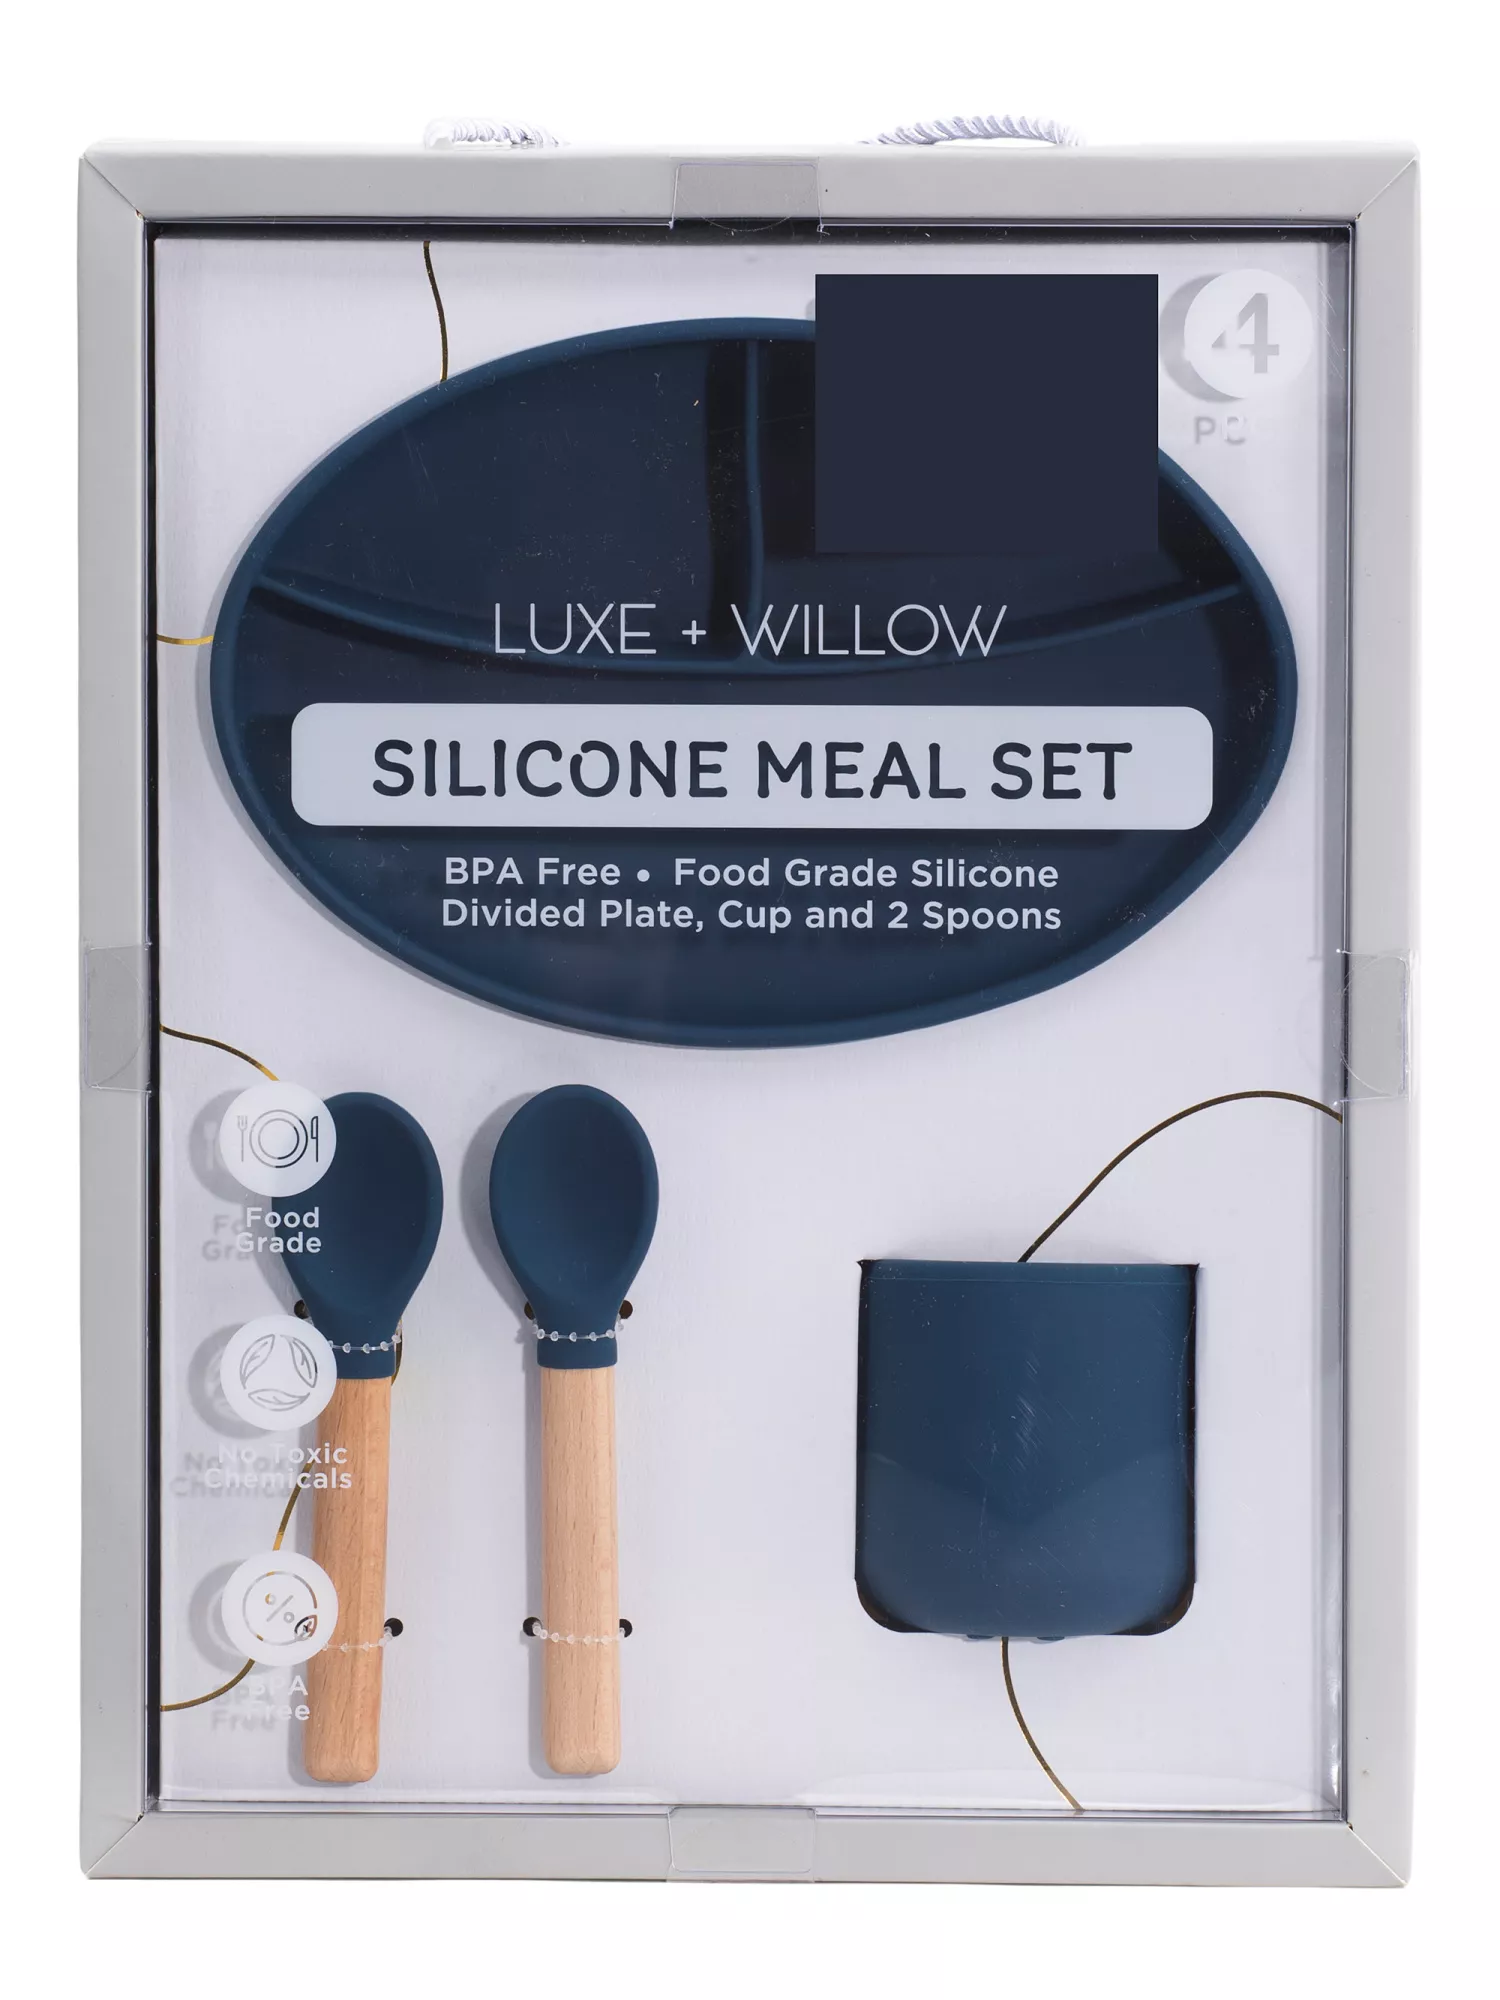 NEW Luxe + Willow Silicone Meal Set BPA Free Food Grade Silicone